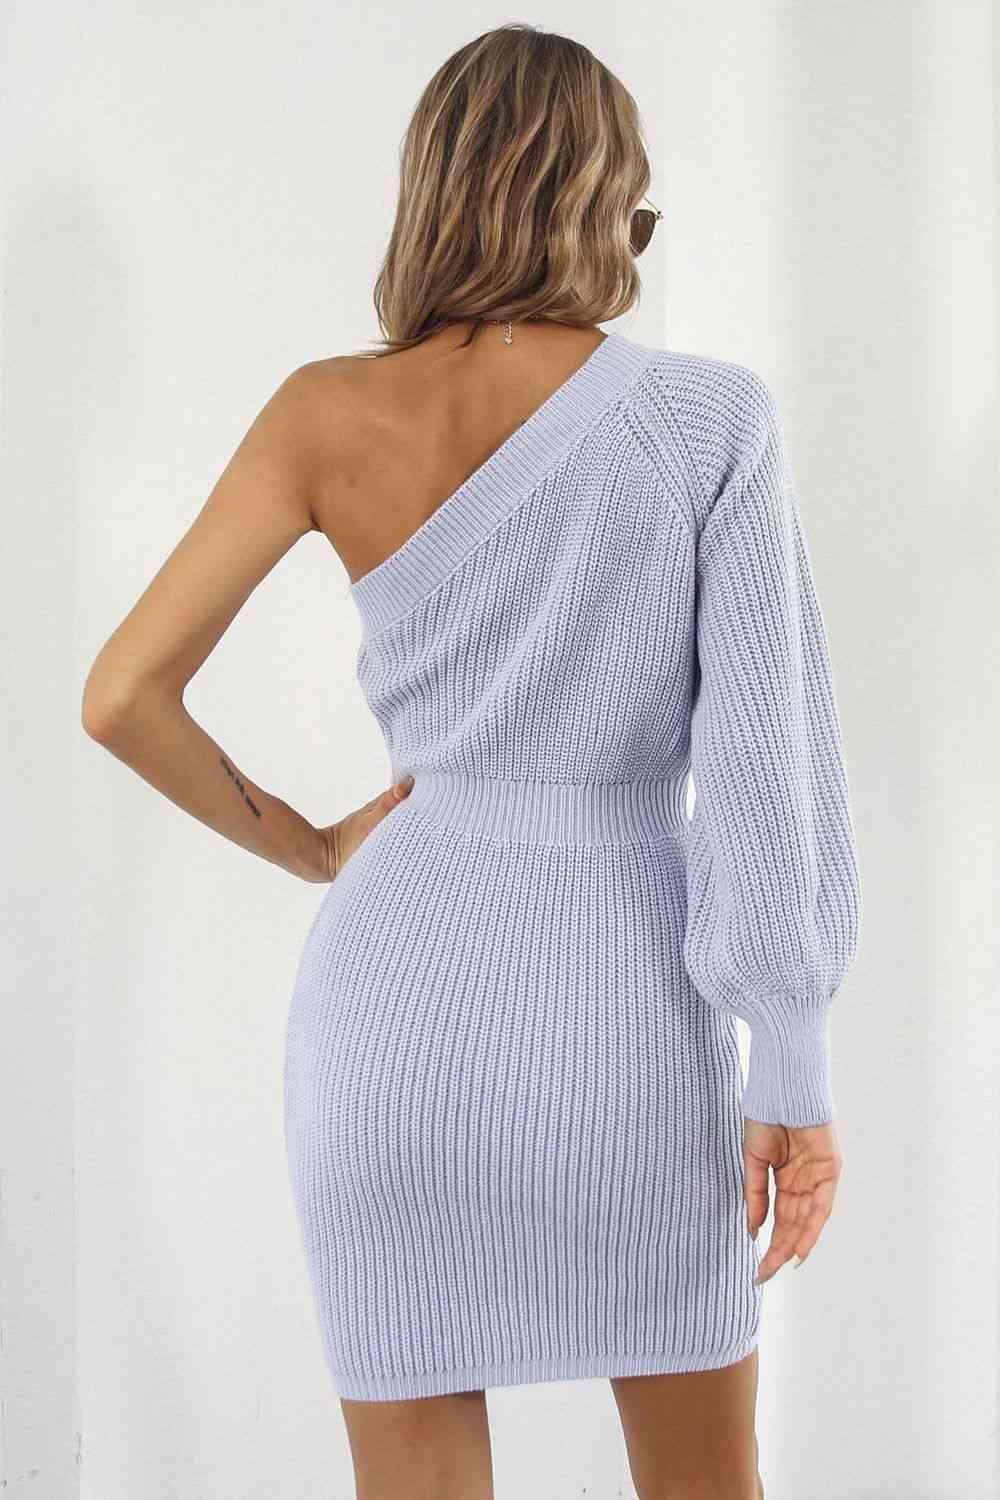 Comfy Chic Knitted One Shoulder Sweater Dress - MXSTUDIO.COM